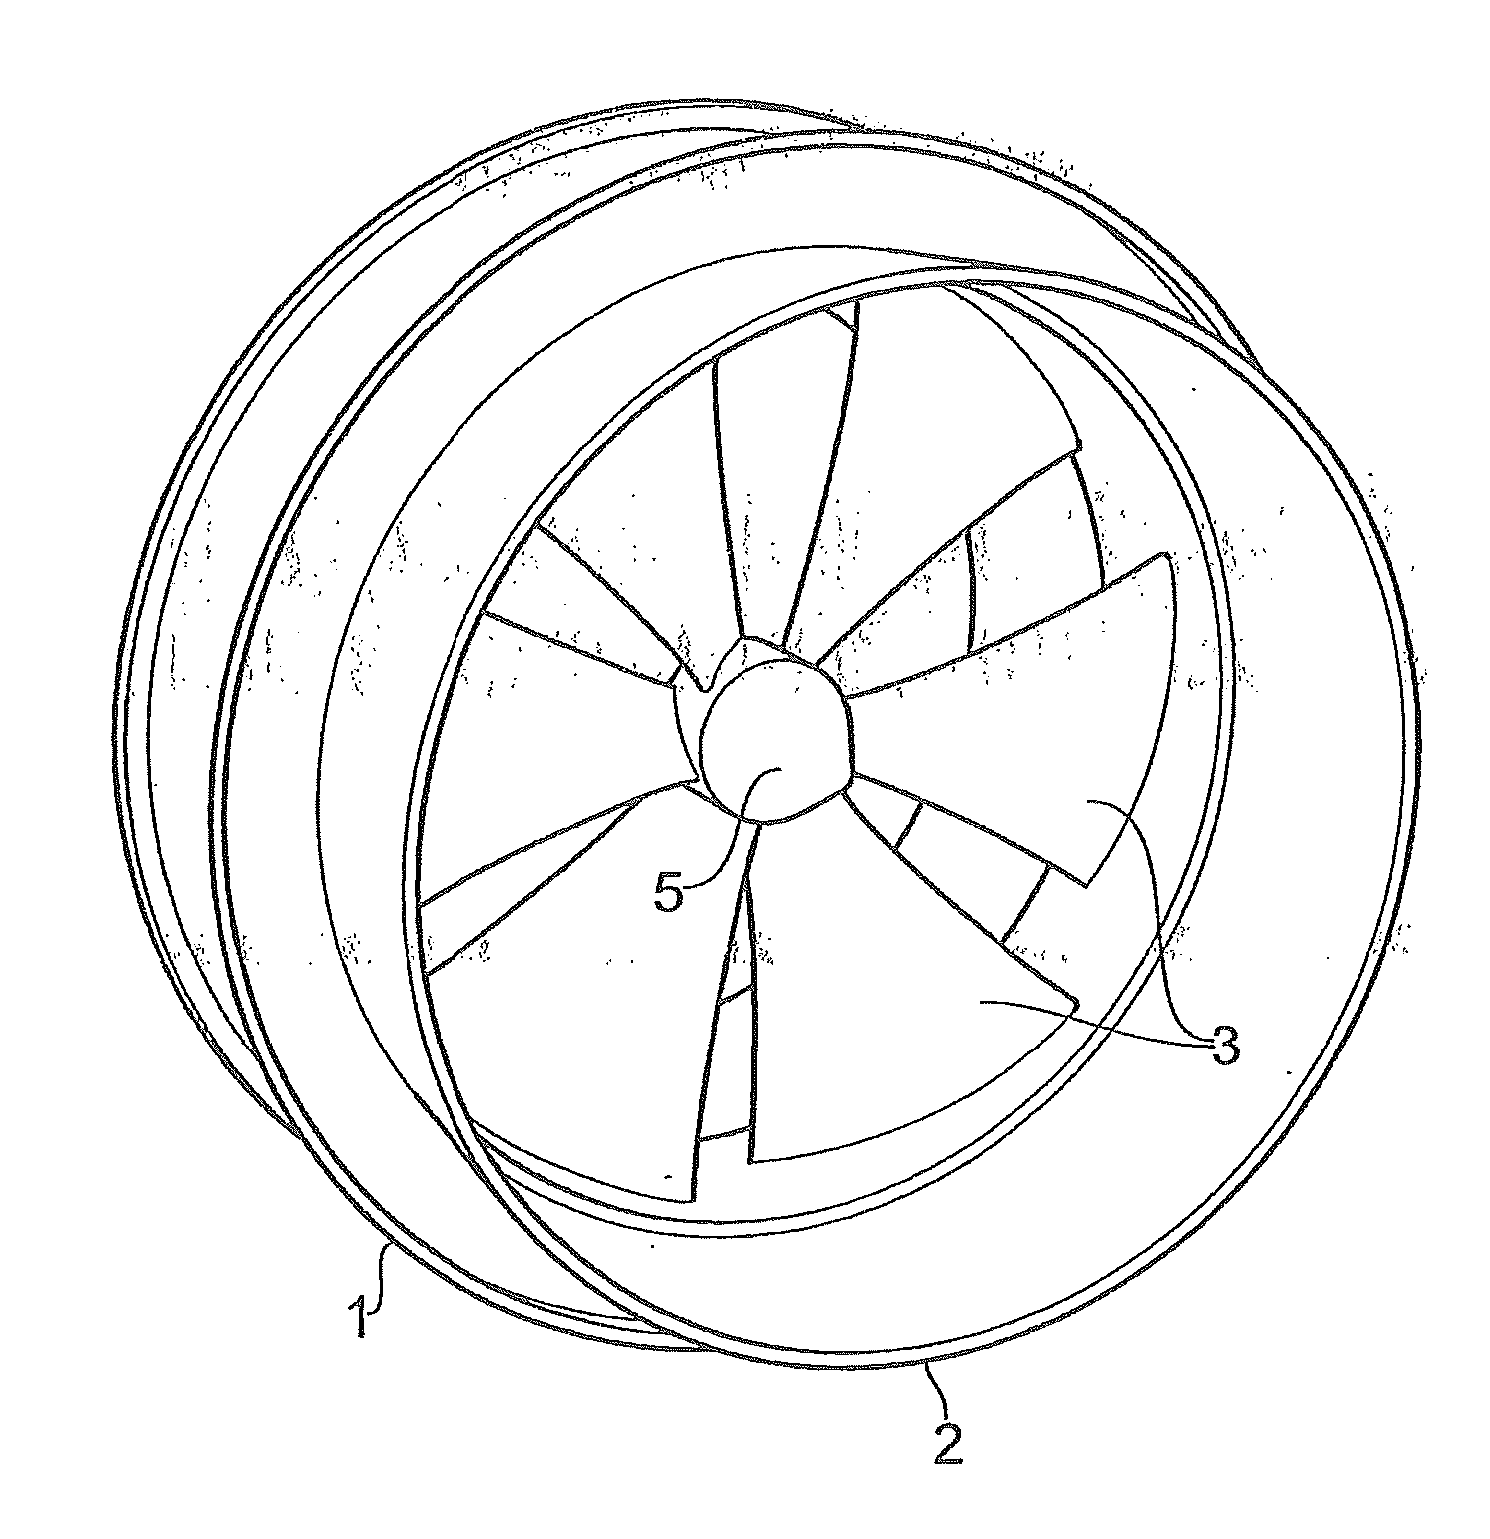 Support of propeller unit for a vessel